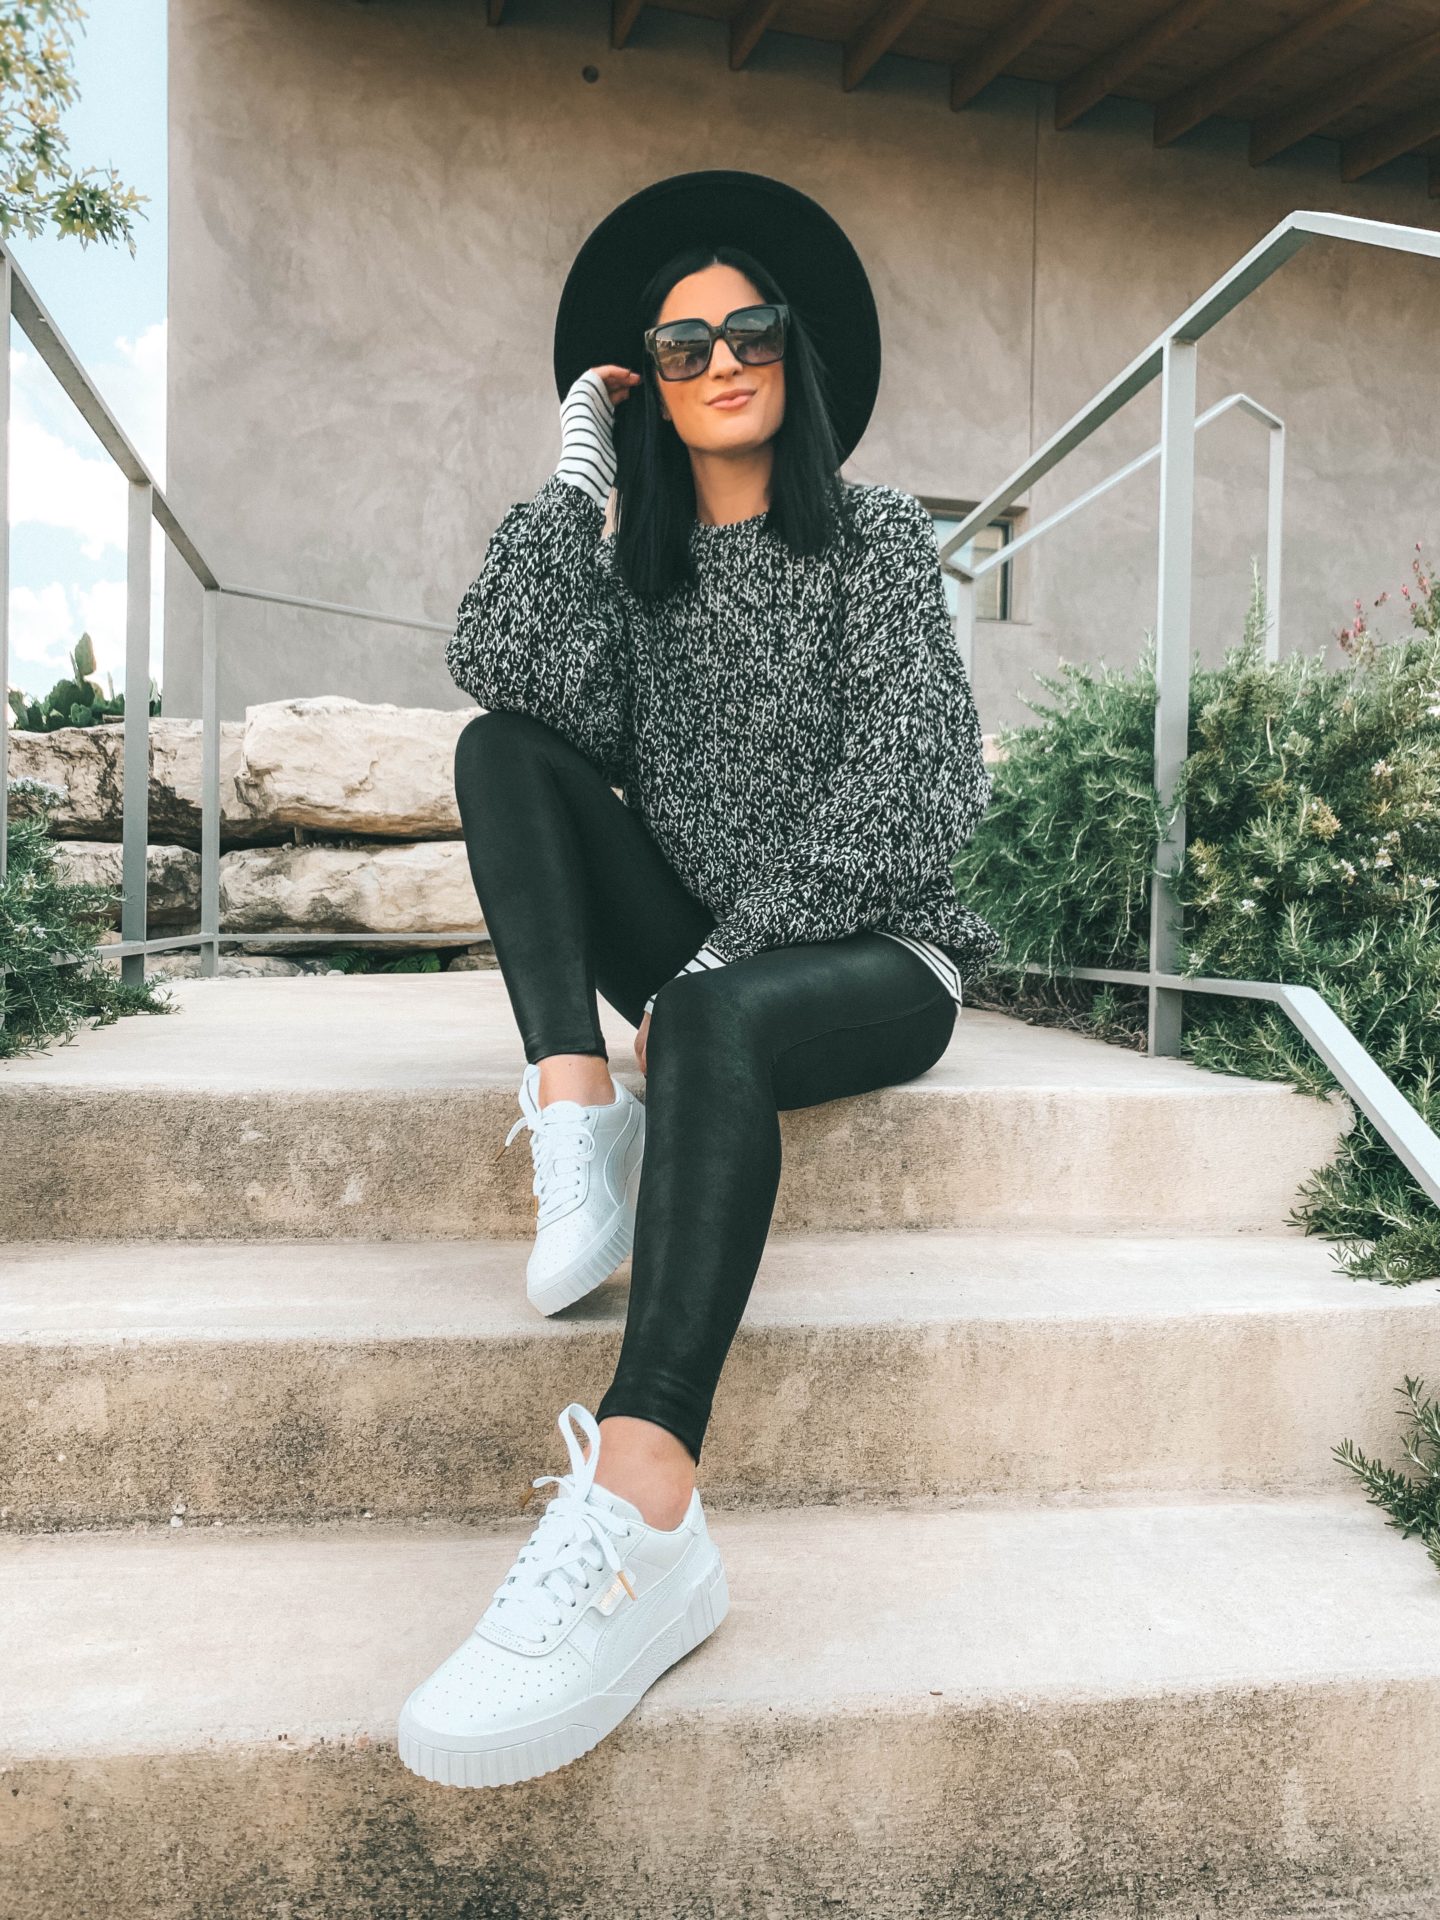 How to Wear White Sneakers by popular fashion blog, Dressed to Kill: image of a woman wearing a TopShop black and white sweater, black felt hat, black leggings, and white Puma sneakers.